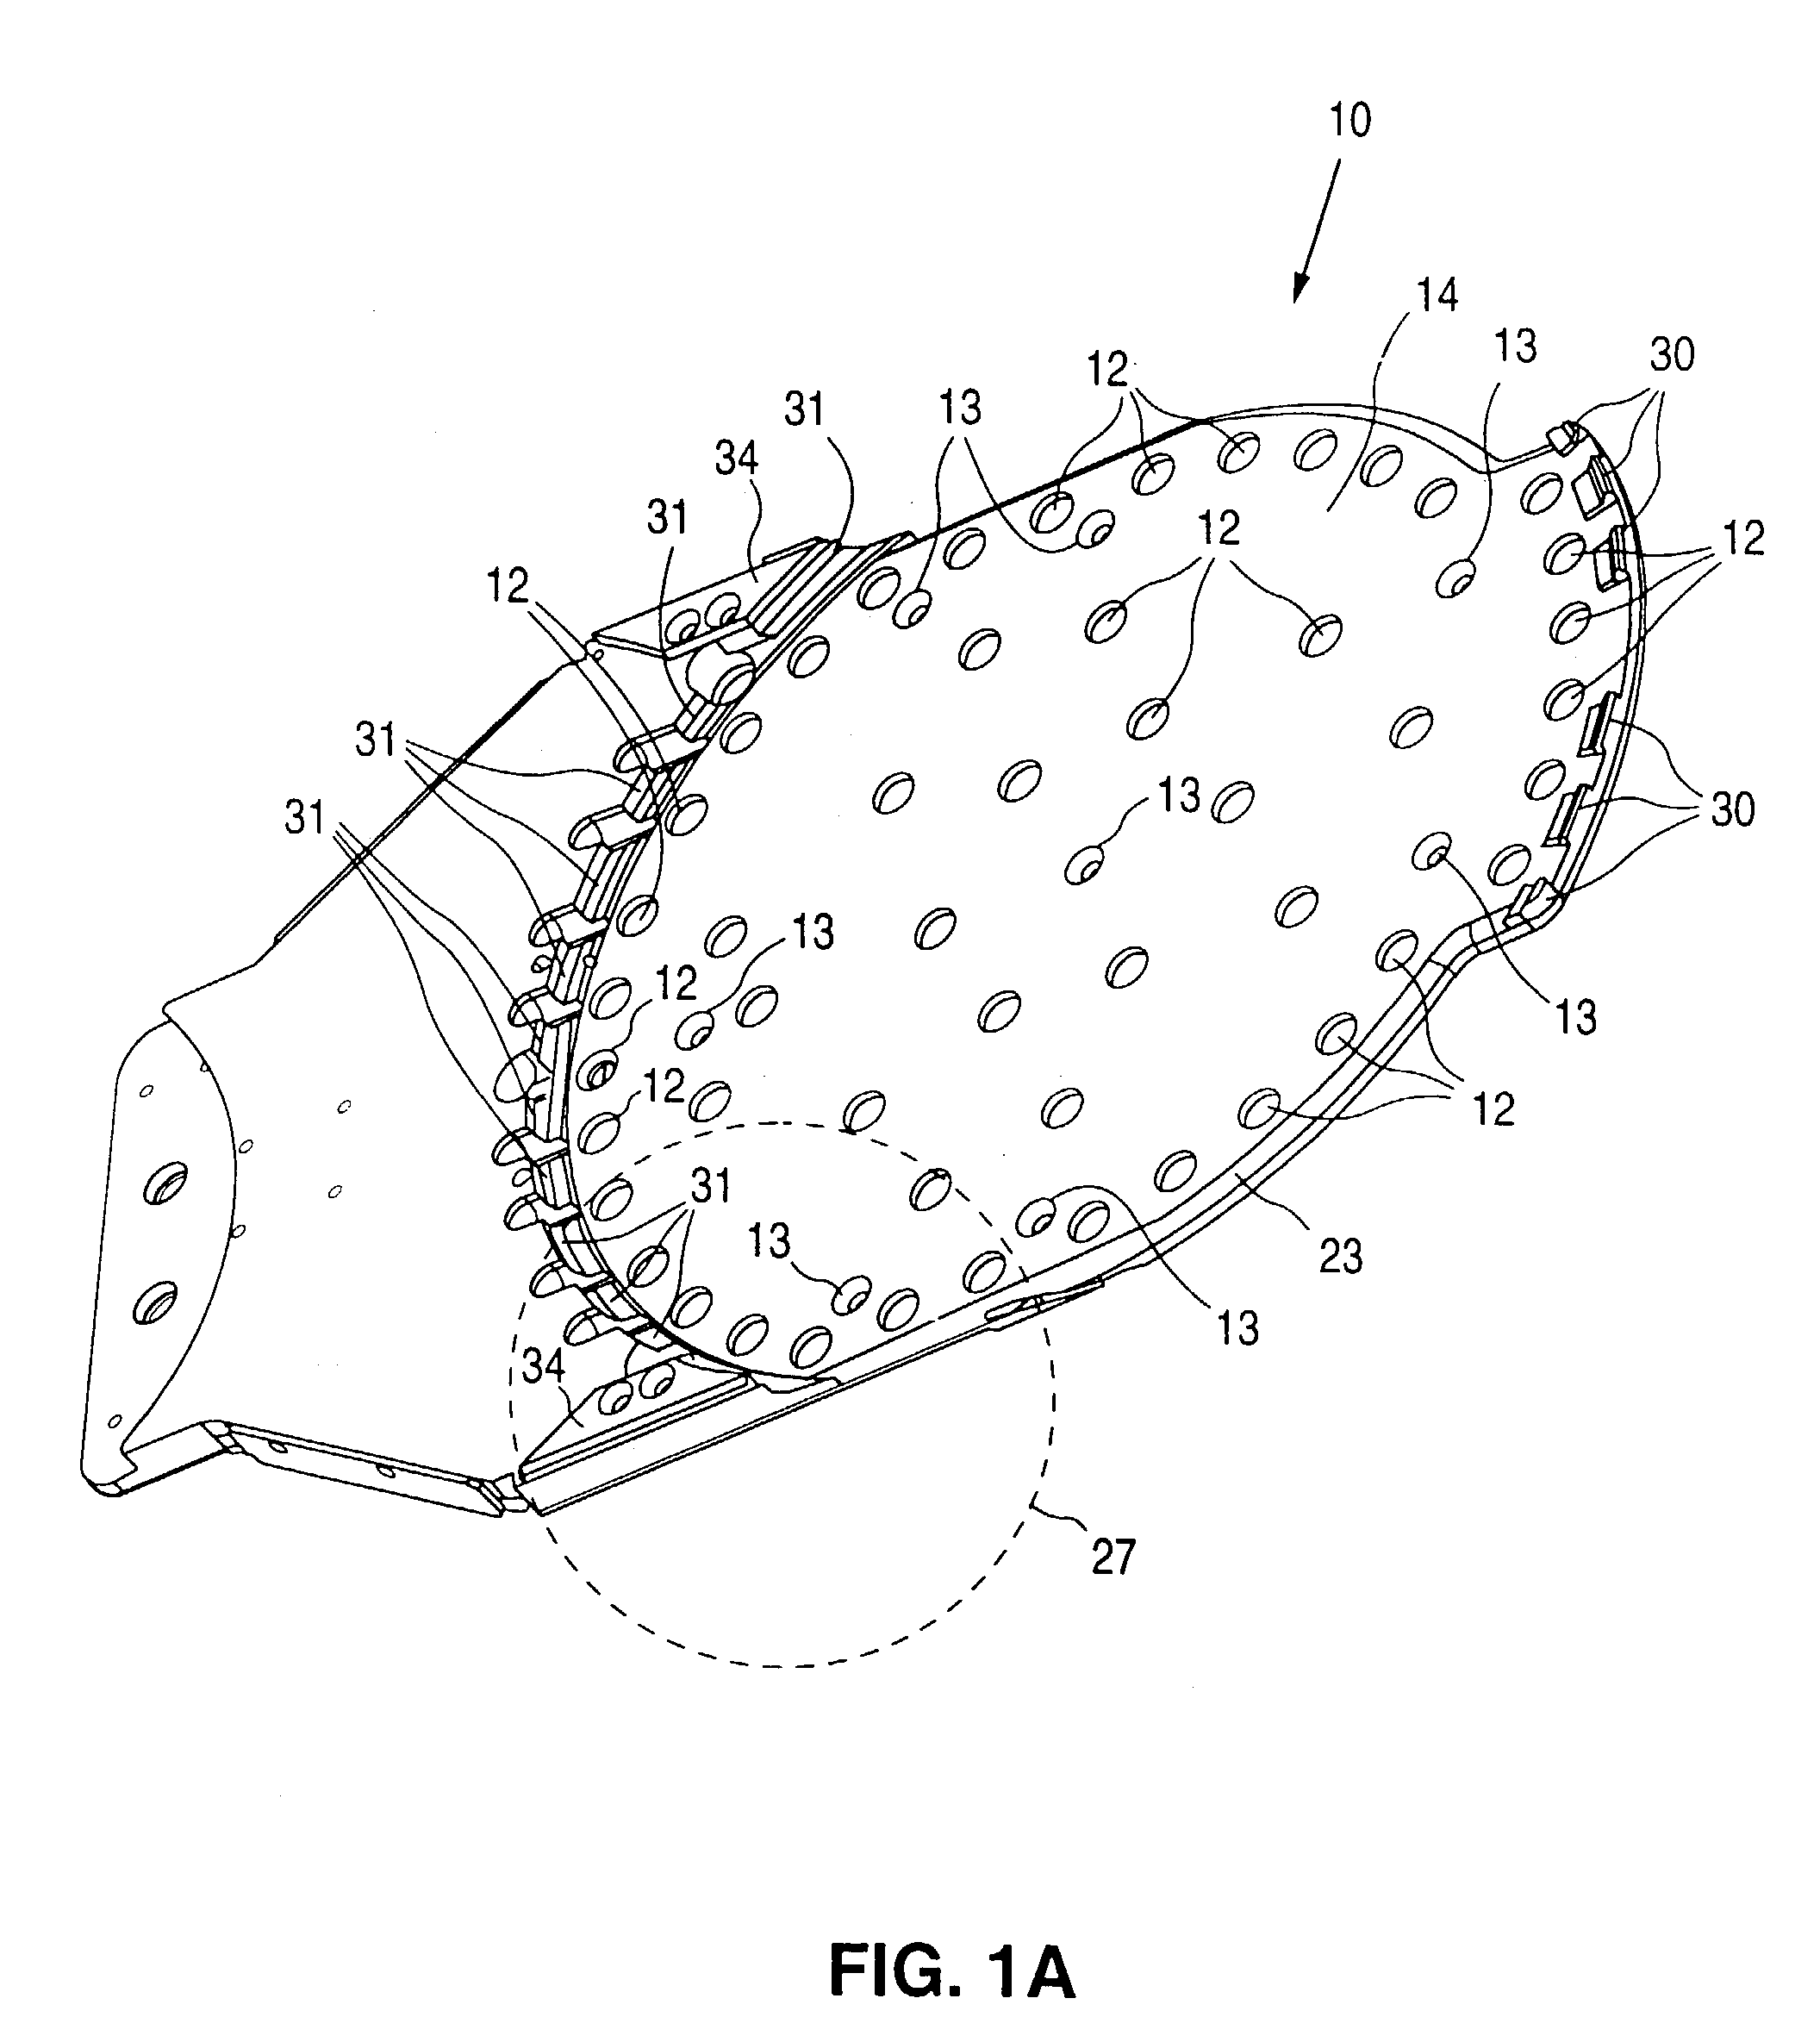 Detection and handling of semiconductor wafers and wafers-like objects